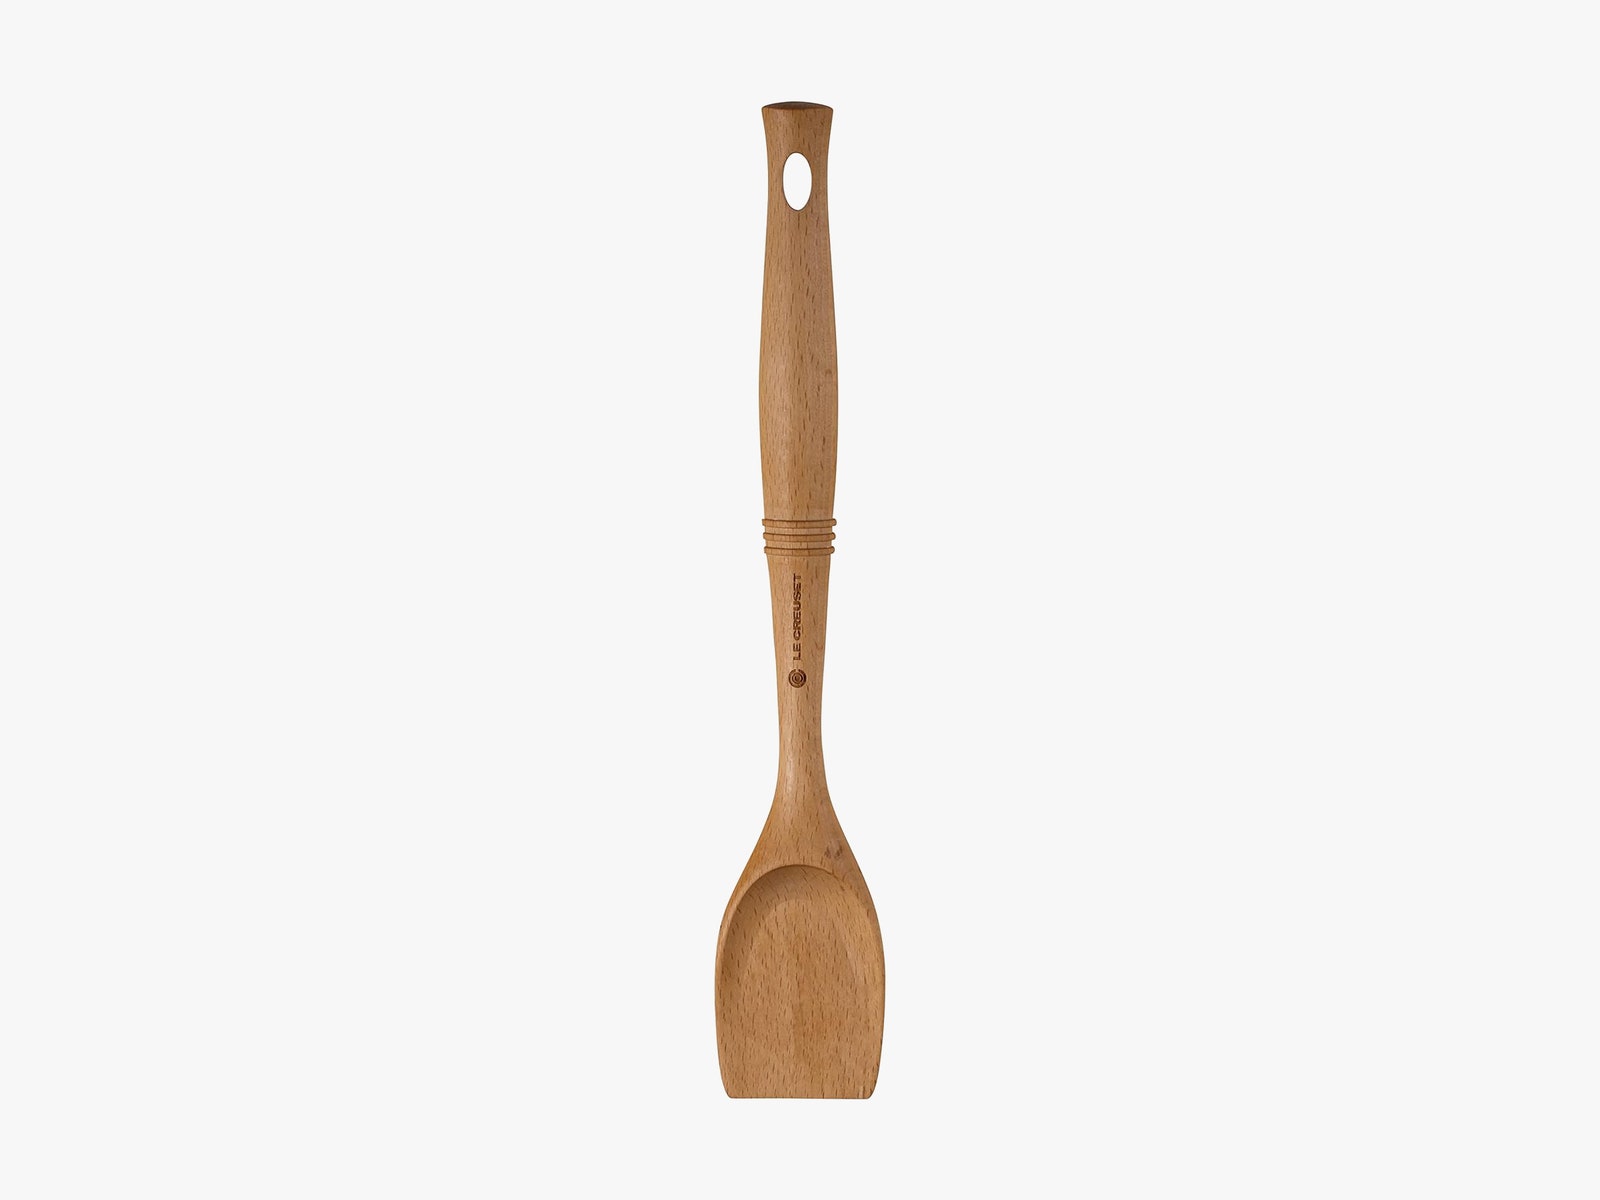 Wooden spoon with flat edge for scraping and slightly curvy handle